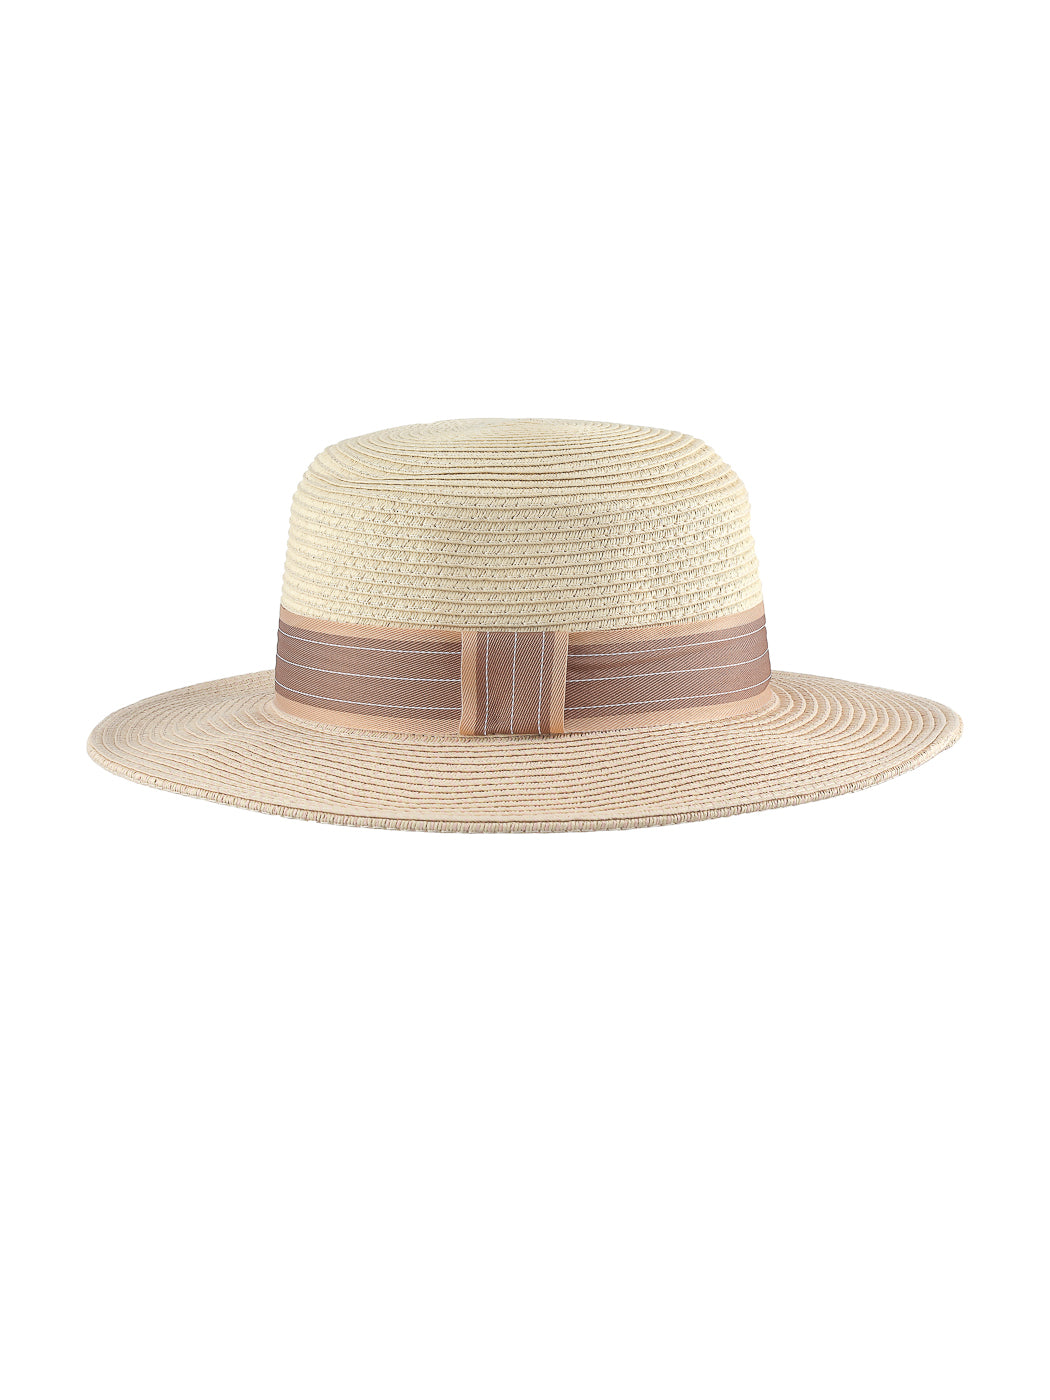 MINISO BRITISH STYLE BICOLOR STRAW HAT WITH FLAT TOP ( PINK ) 2010116810101 FASHIONABLE HAT-1